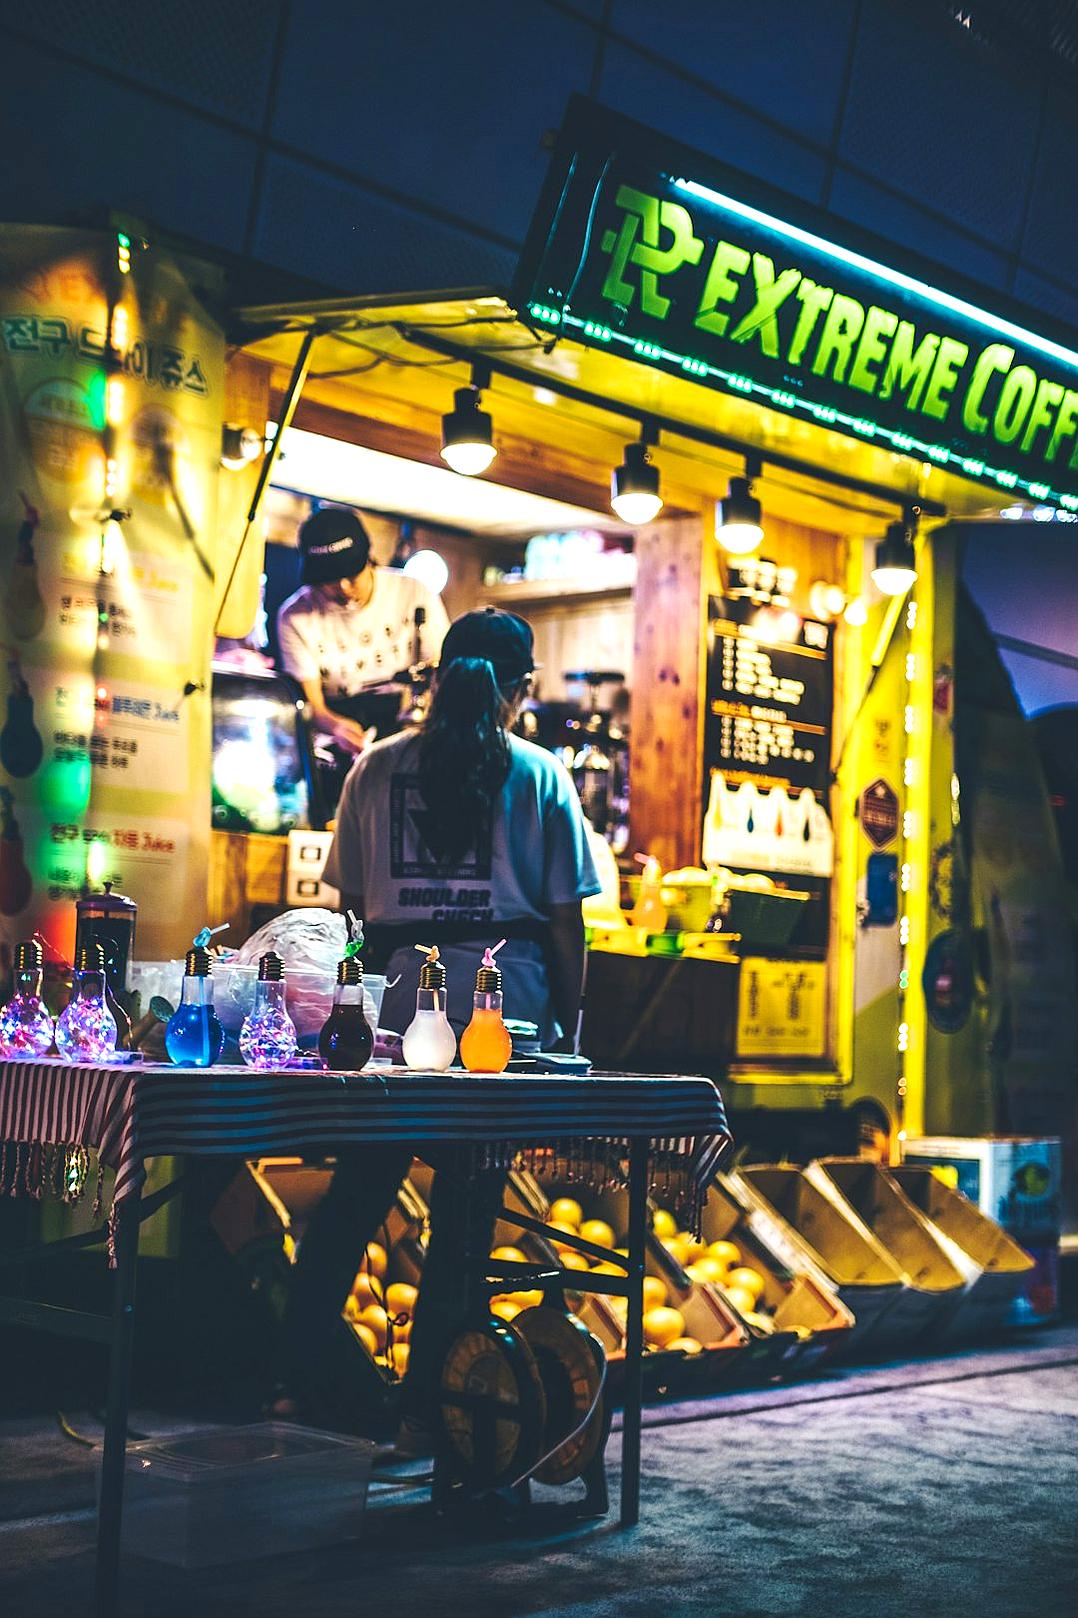 a night time photo of an outdoor coffee shop in the middle east, with neon lights and colorful decorations. A man is standing behind his stand selling drinks from a cart full of fruits and snacks. The sign above says “charger extreme Coffee”. He has black hair tied back into two braids and wears streetwear . In front there’s another table covered by three large open bags filled with colourful glowinthedark paint. On top one bag stands on its side with some tubes coming out of it.